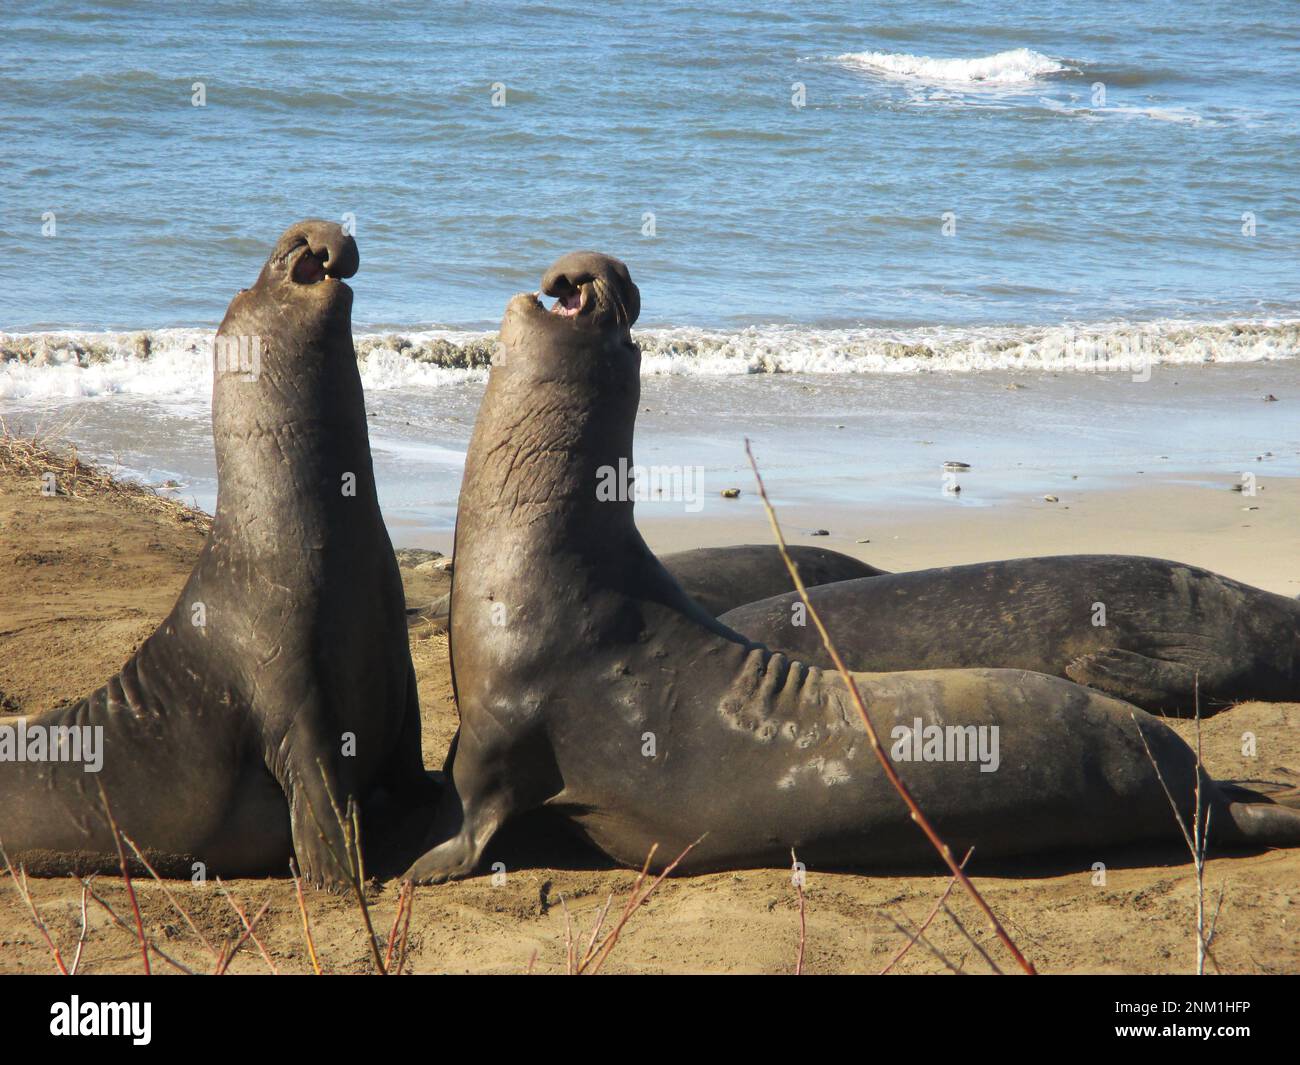 Every winter, dozens of elephant seals make their way to the beaches at Greater Farallones National Marine Sanctuary and other West Coast sanctuaries to mate. Males -- like the two seen here -- arrive first and fight for territory on the beach in quick, aggressive battles ca. 6 February 2016 Stock Photo